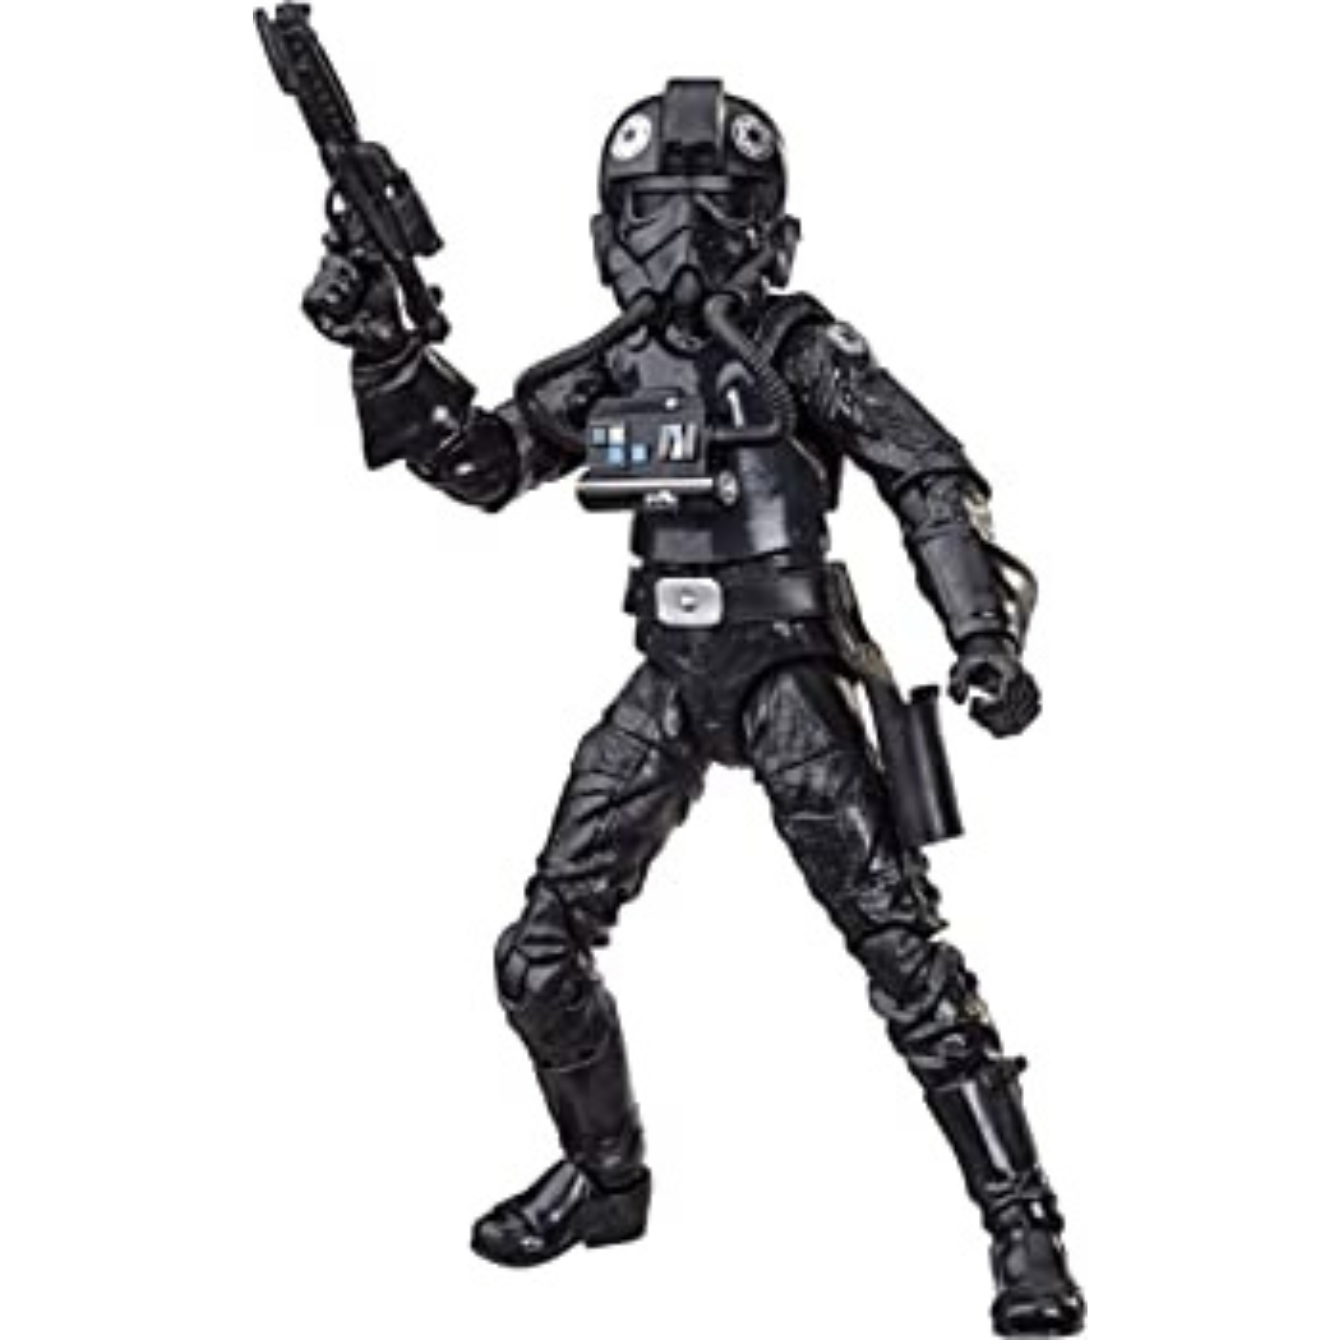 Star Wars 40th Anniversary The Black Series 6" Imperial TIE Fighter Pilot (Empire Strikes Back)